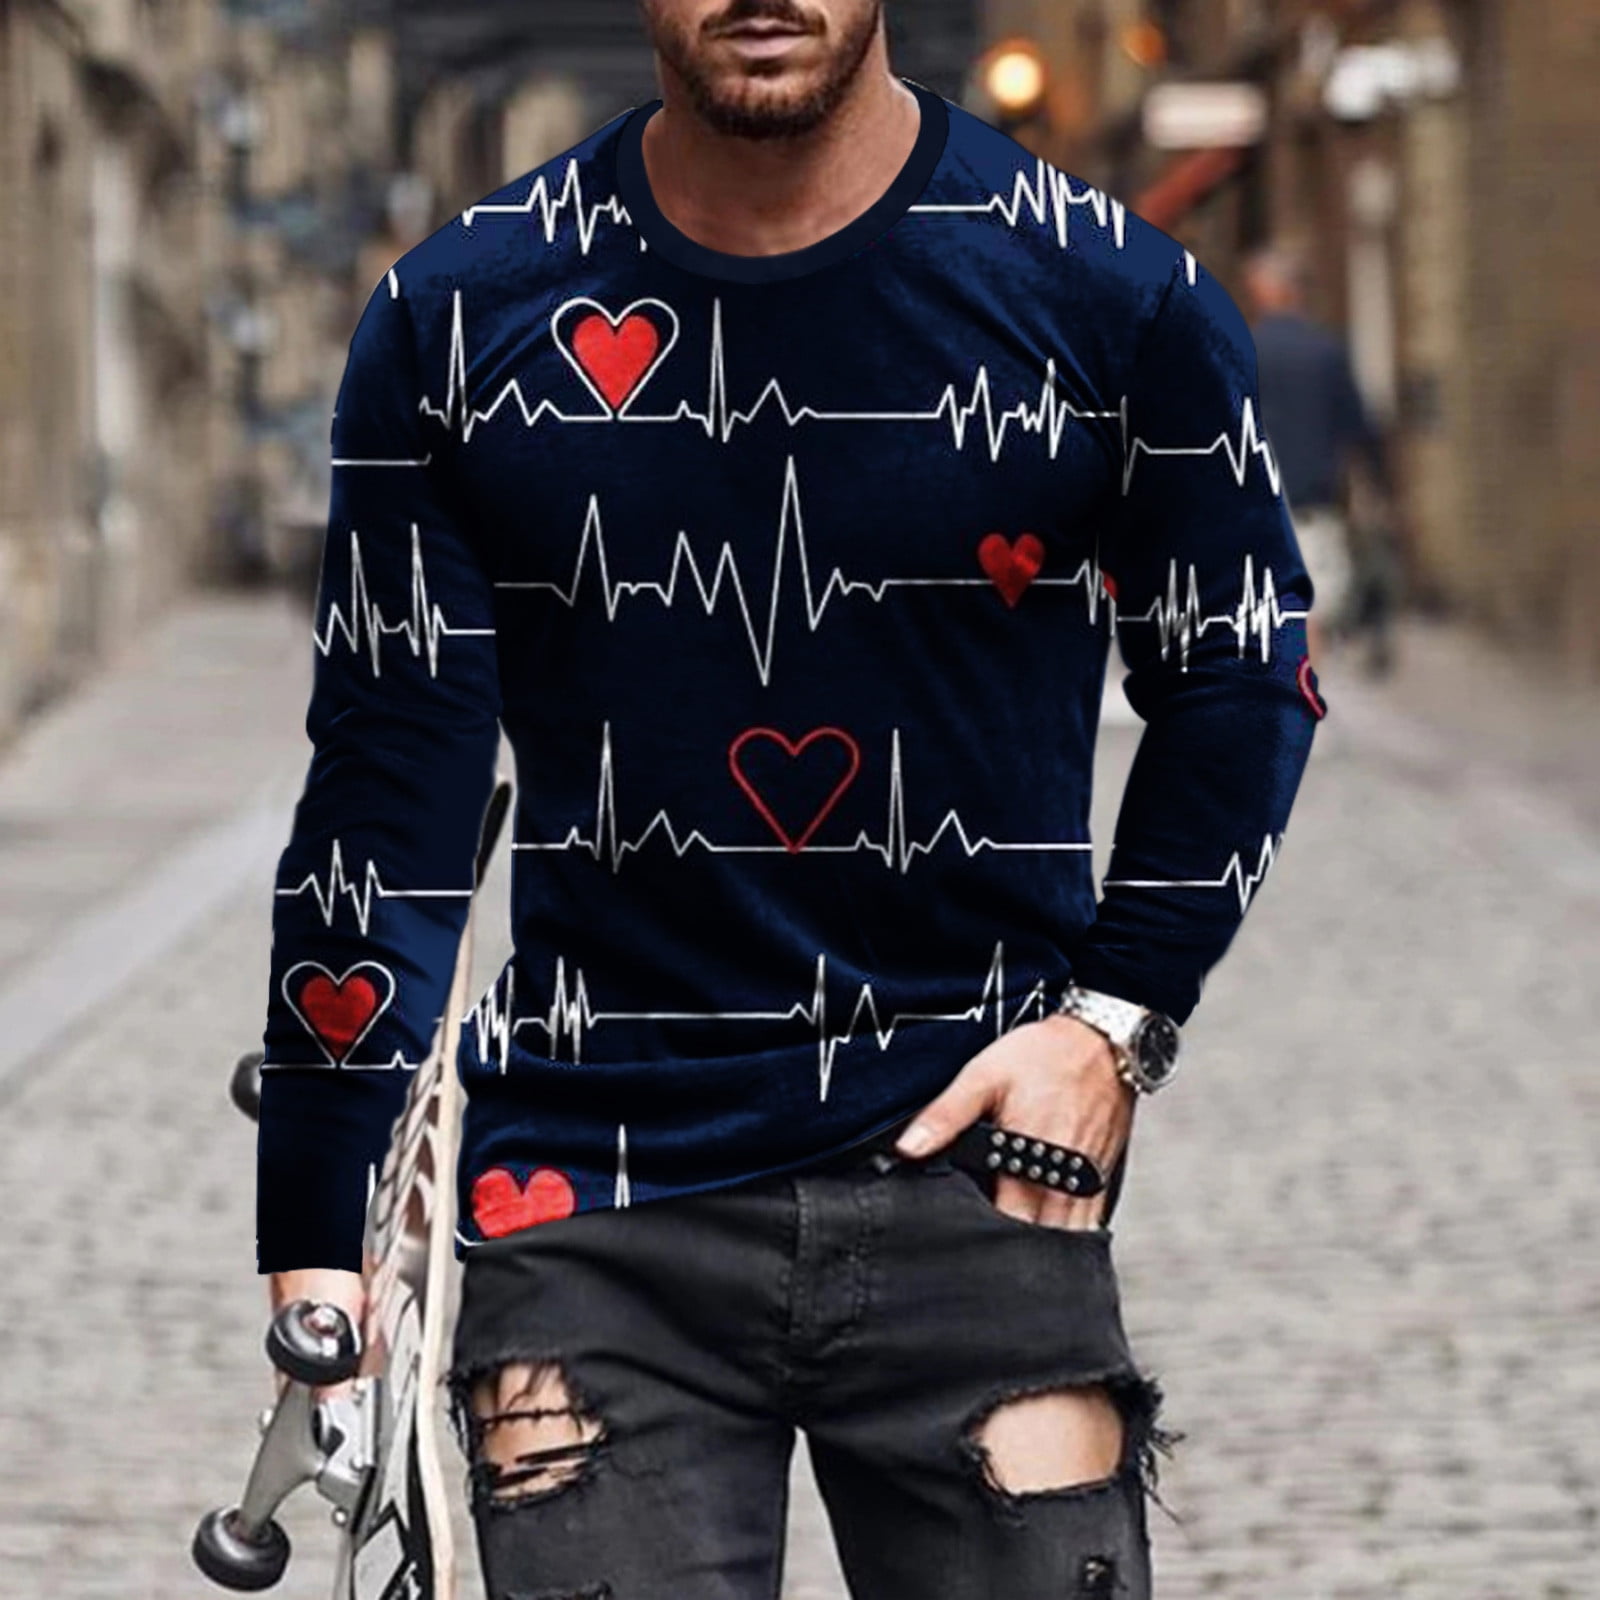 YYDGH Mens Long Sleeve T-Shirt Fashion 3D Funny Heart Print Valentine's Day  Sweater Round Neck Casual Plus Size Shirts Blouse Tops(8#Navy,XL) 